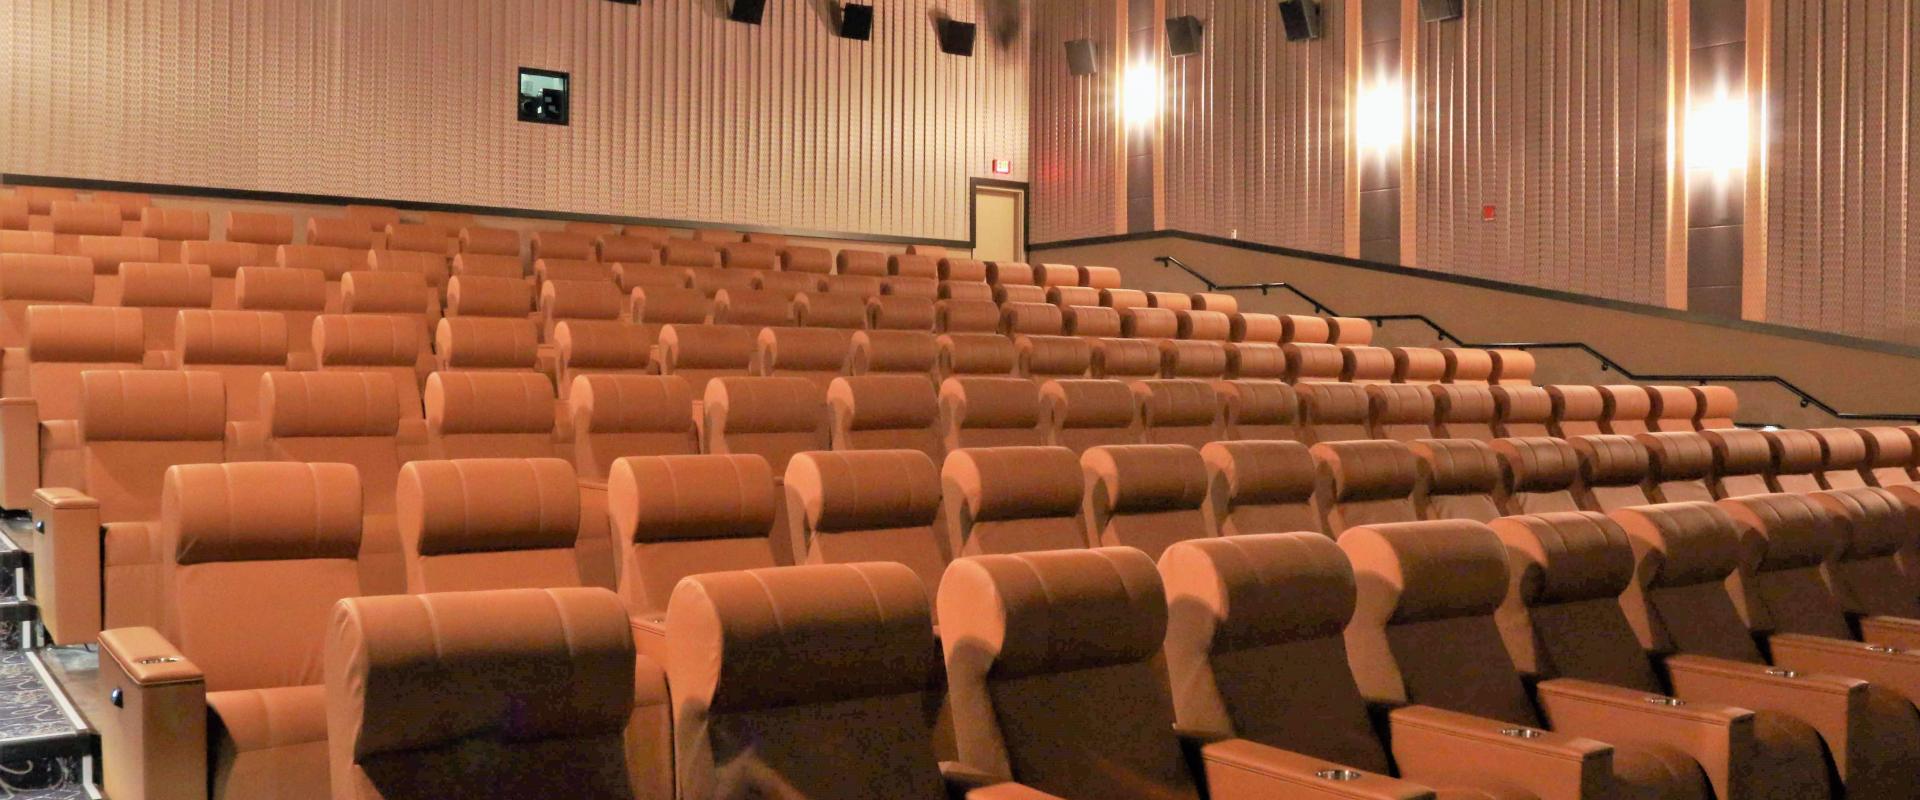 emagine theater shelby township